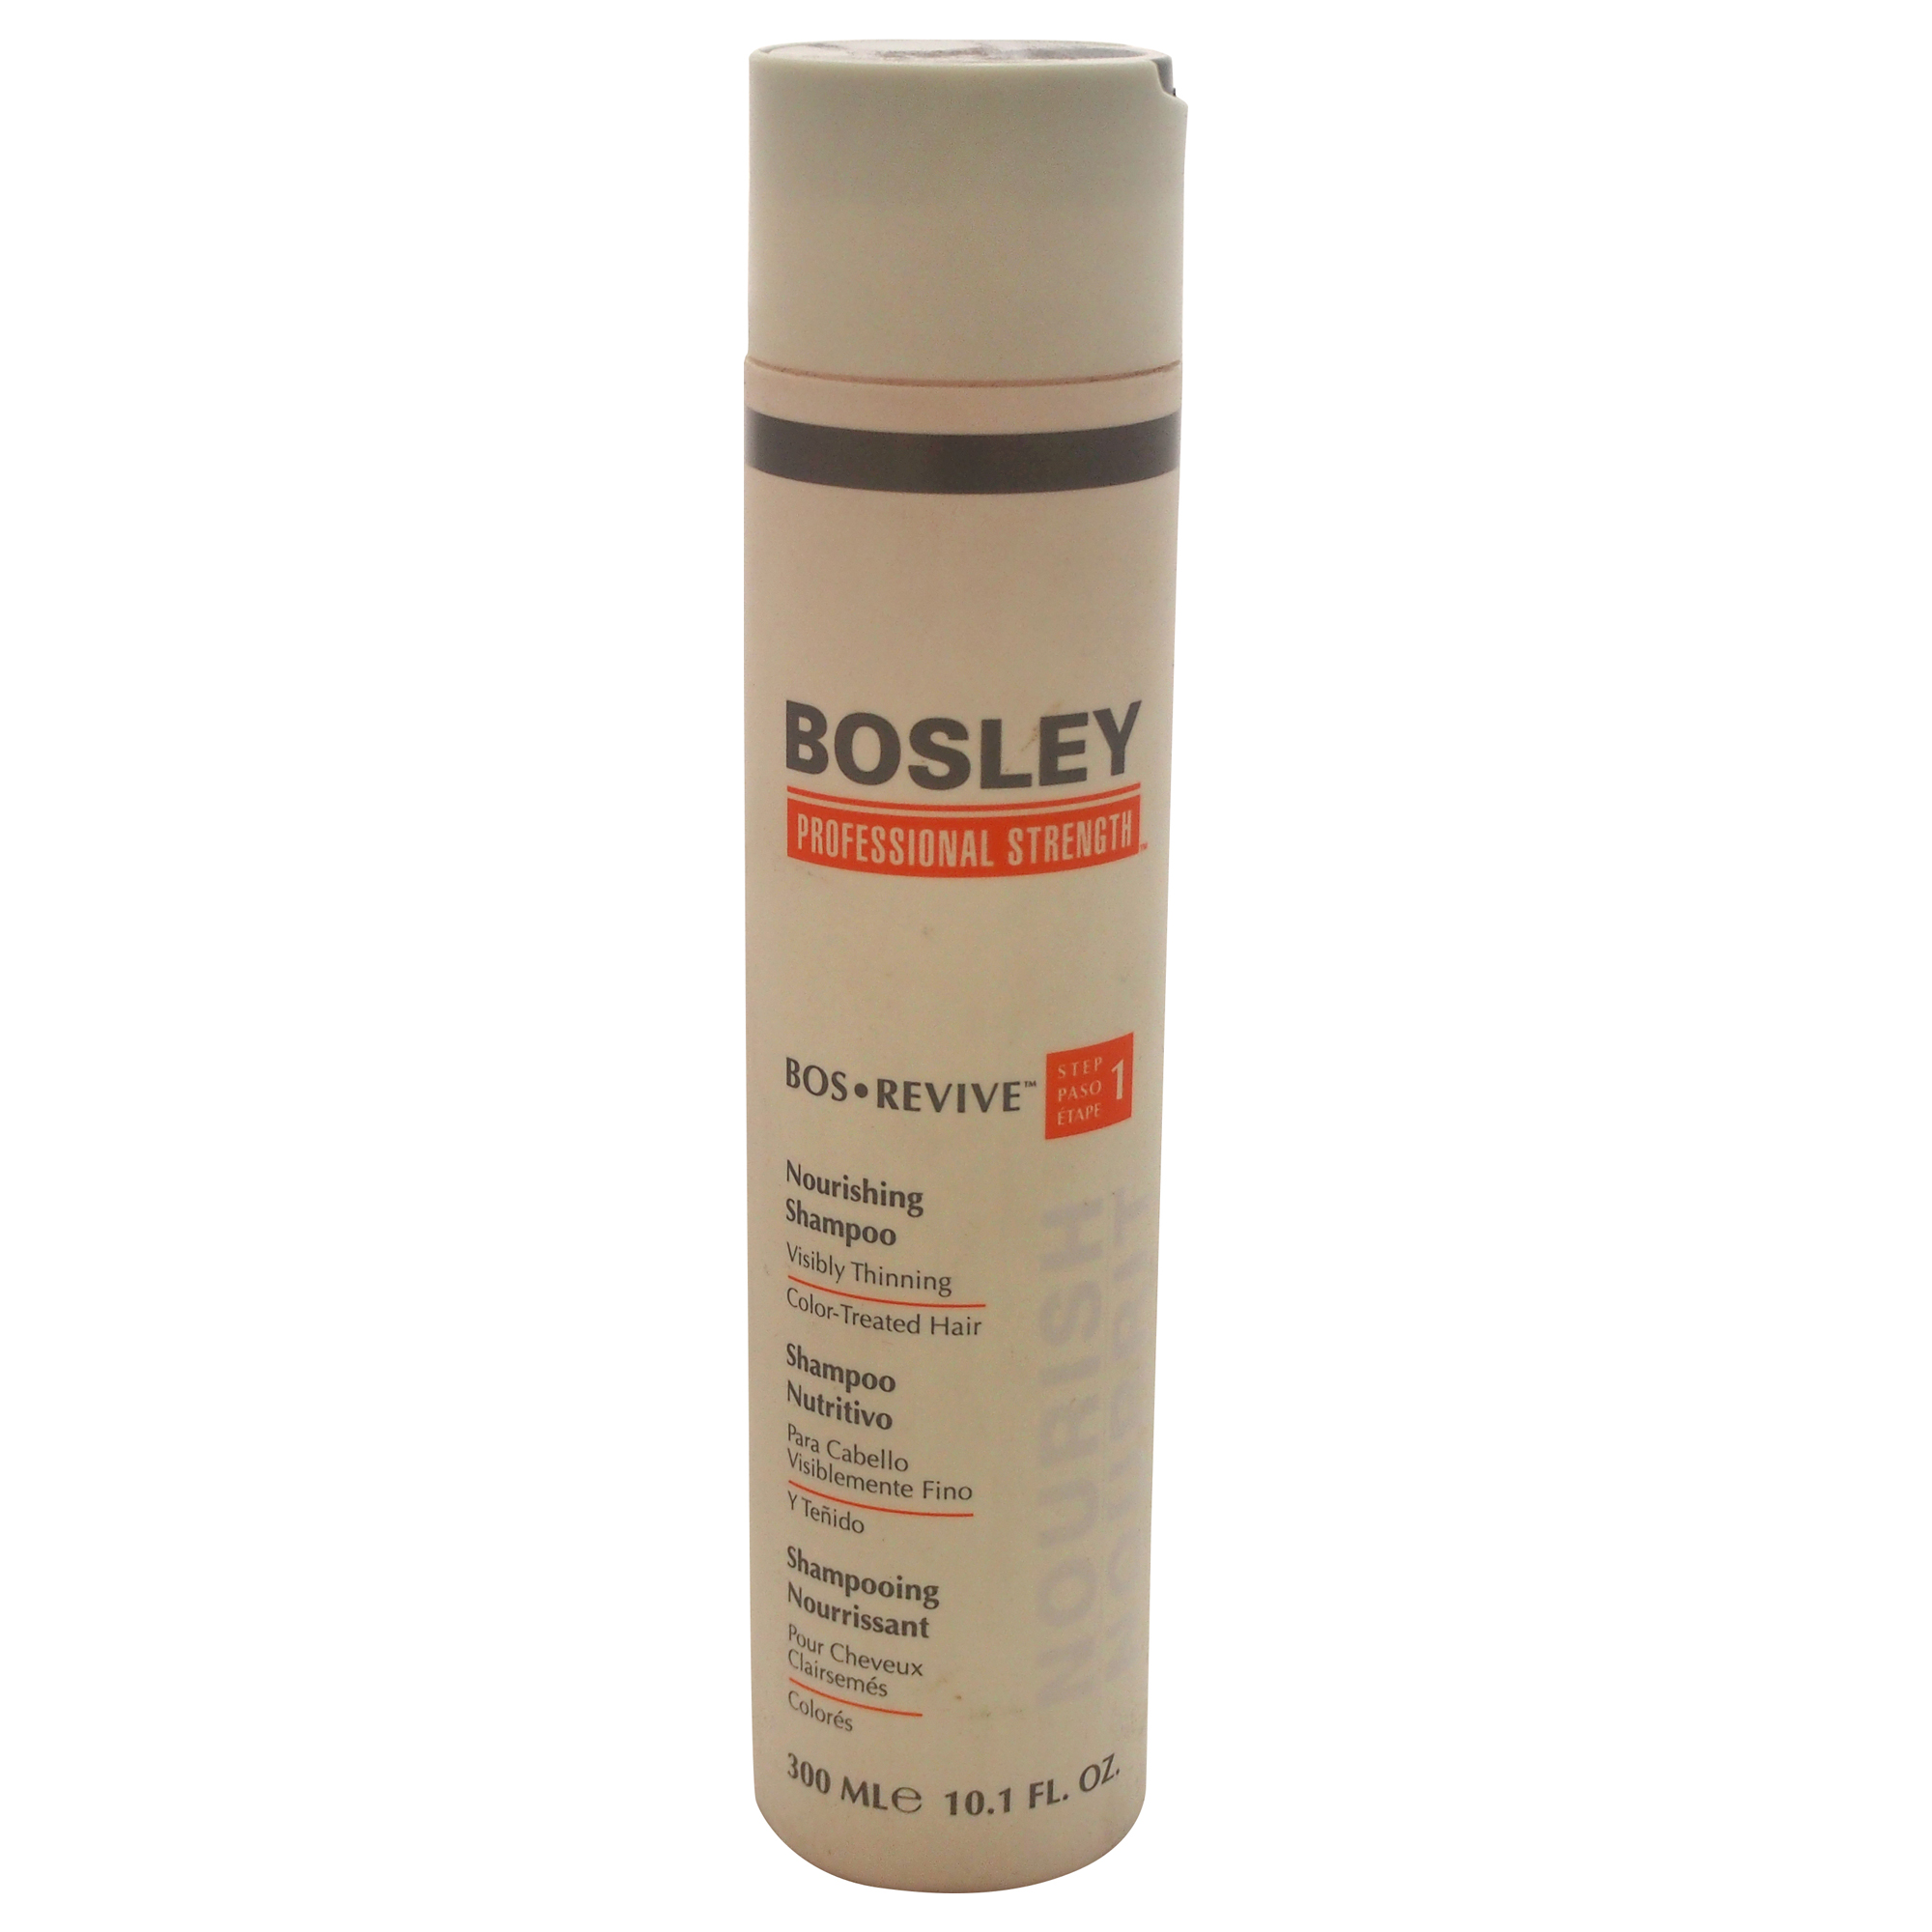 BOSLEY Bos Revive Nourishing Shampoo for Visibly Thinning Color-Treated Hair